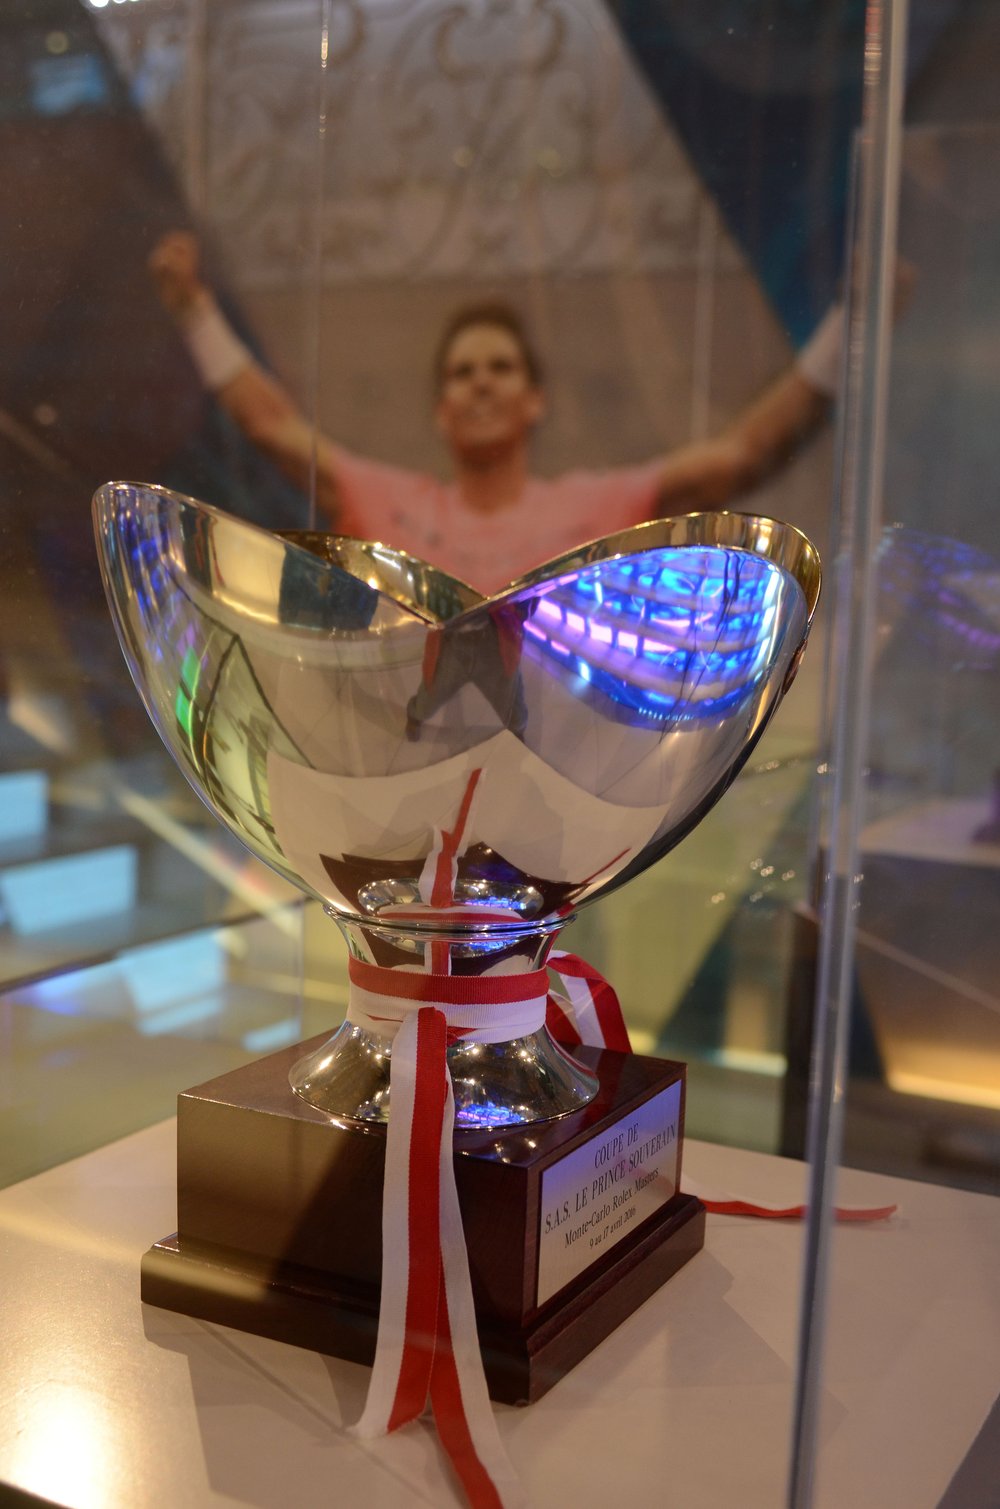 THE MOST IMPORTANT TROPHIES OF TENNIS PLAYER RAFA NADAL'S SPORTING CAREER IN THE FLAGSHIP STORE